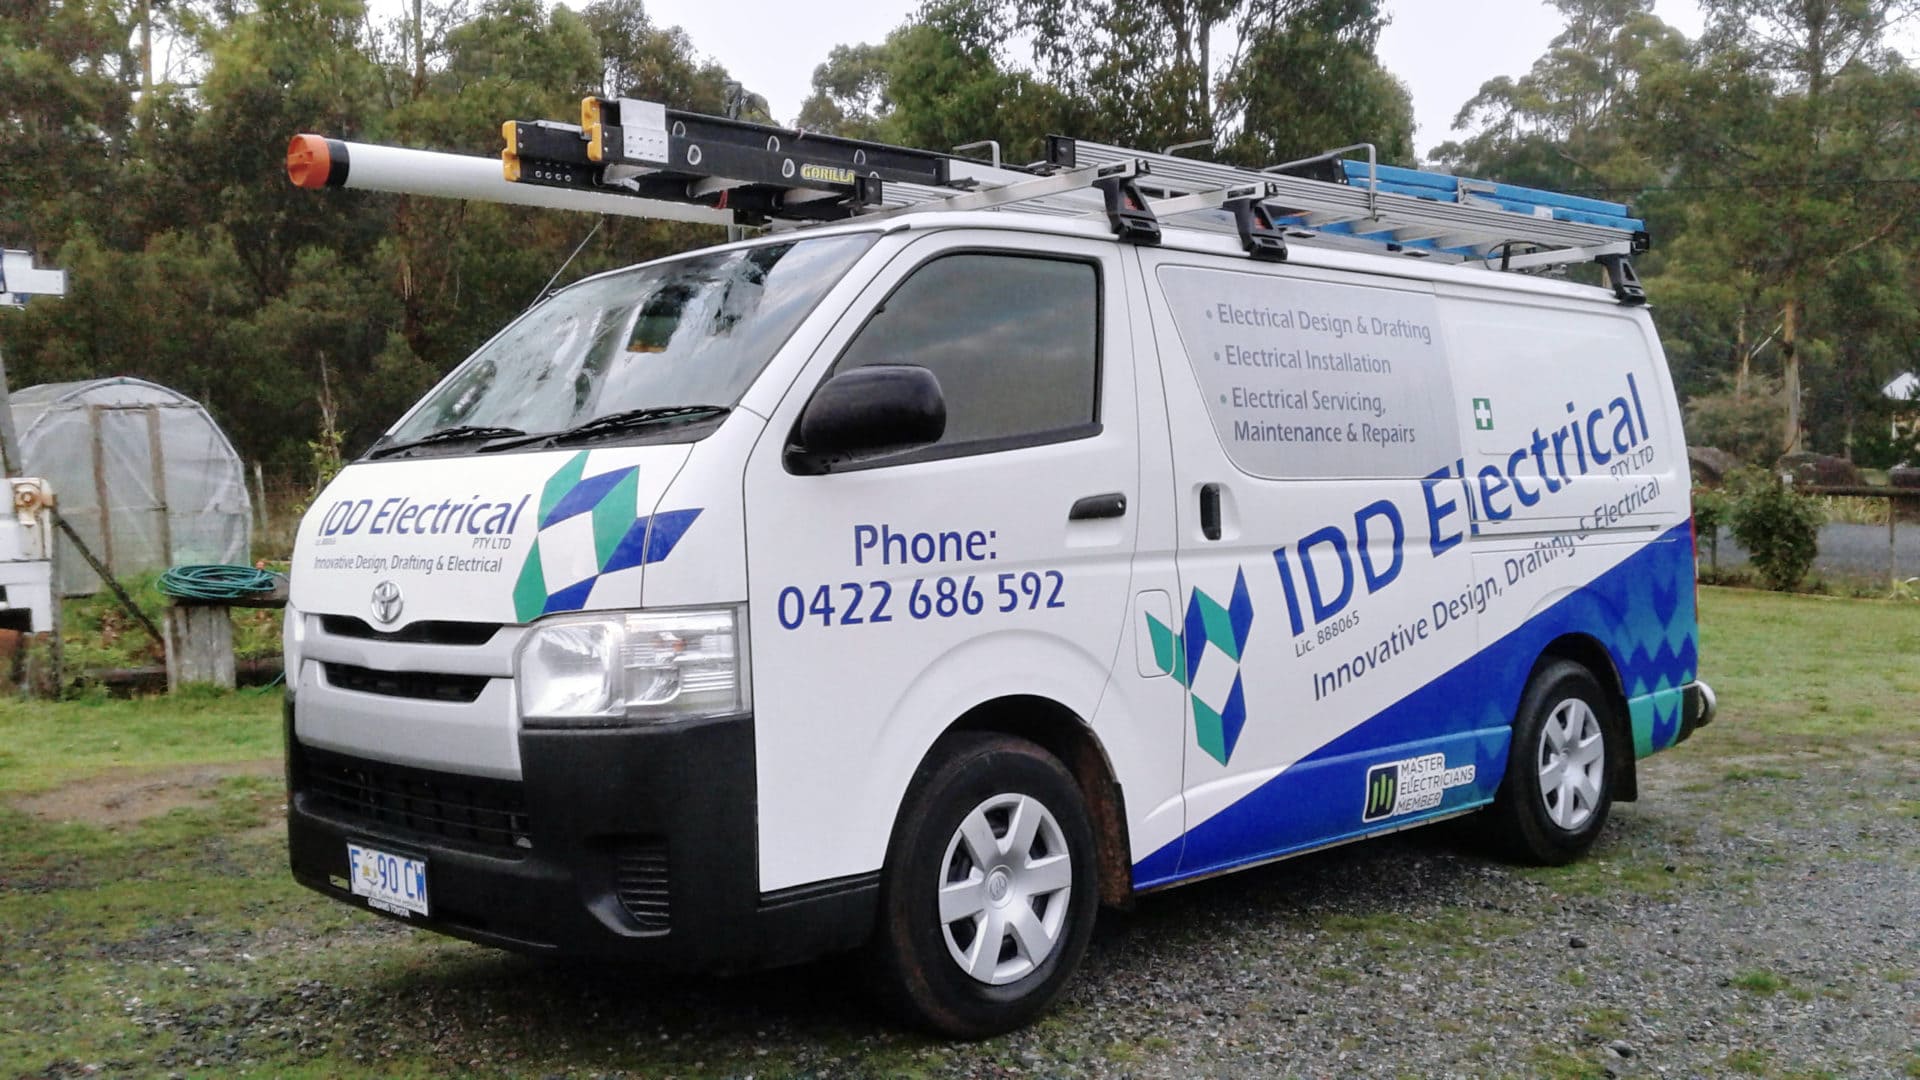 IDD Electricals work van parked in a field in at Sheffield Tasmania. IDD Electrical are an electrician and drafting business based in Northwest Tasmania and web design client of the Tasmanian Web company.